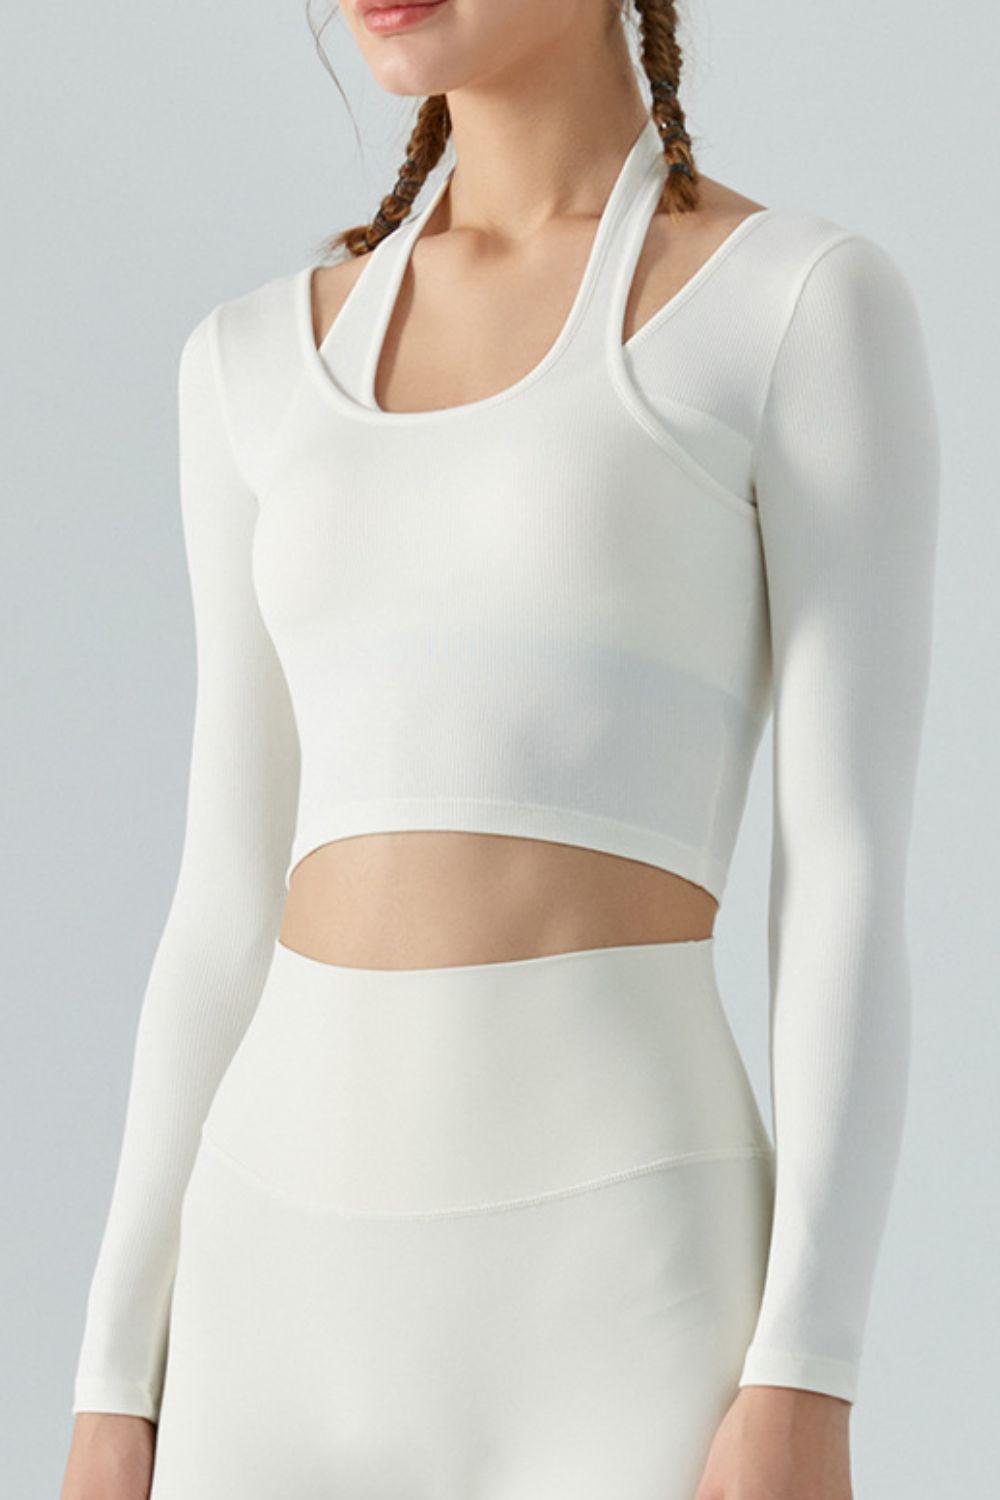 Halter Neck Long Sleeve Cropped Sports Top-TOPS / DRESSES-[Adult]-[Female]-White-S-2022 Online Blue Zone Planet